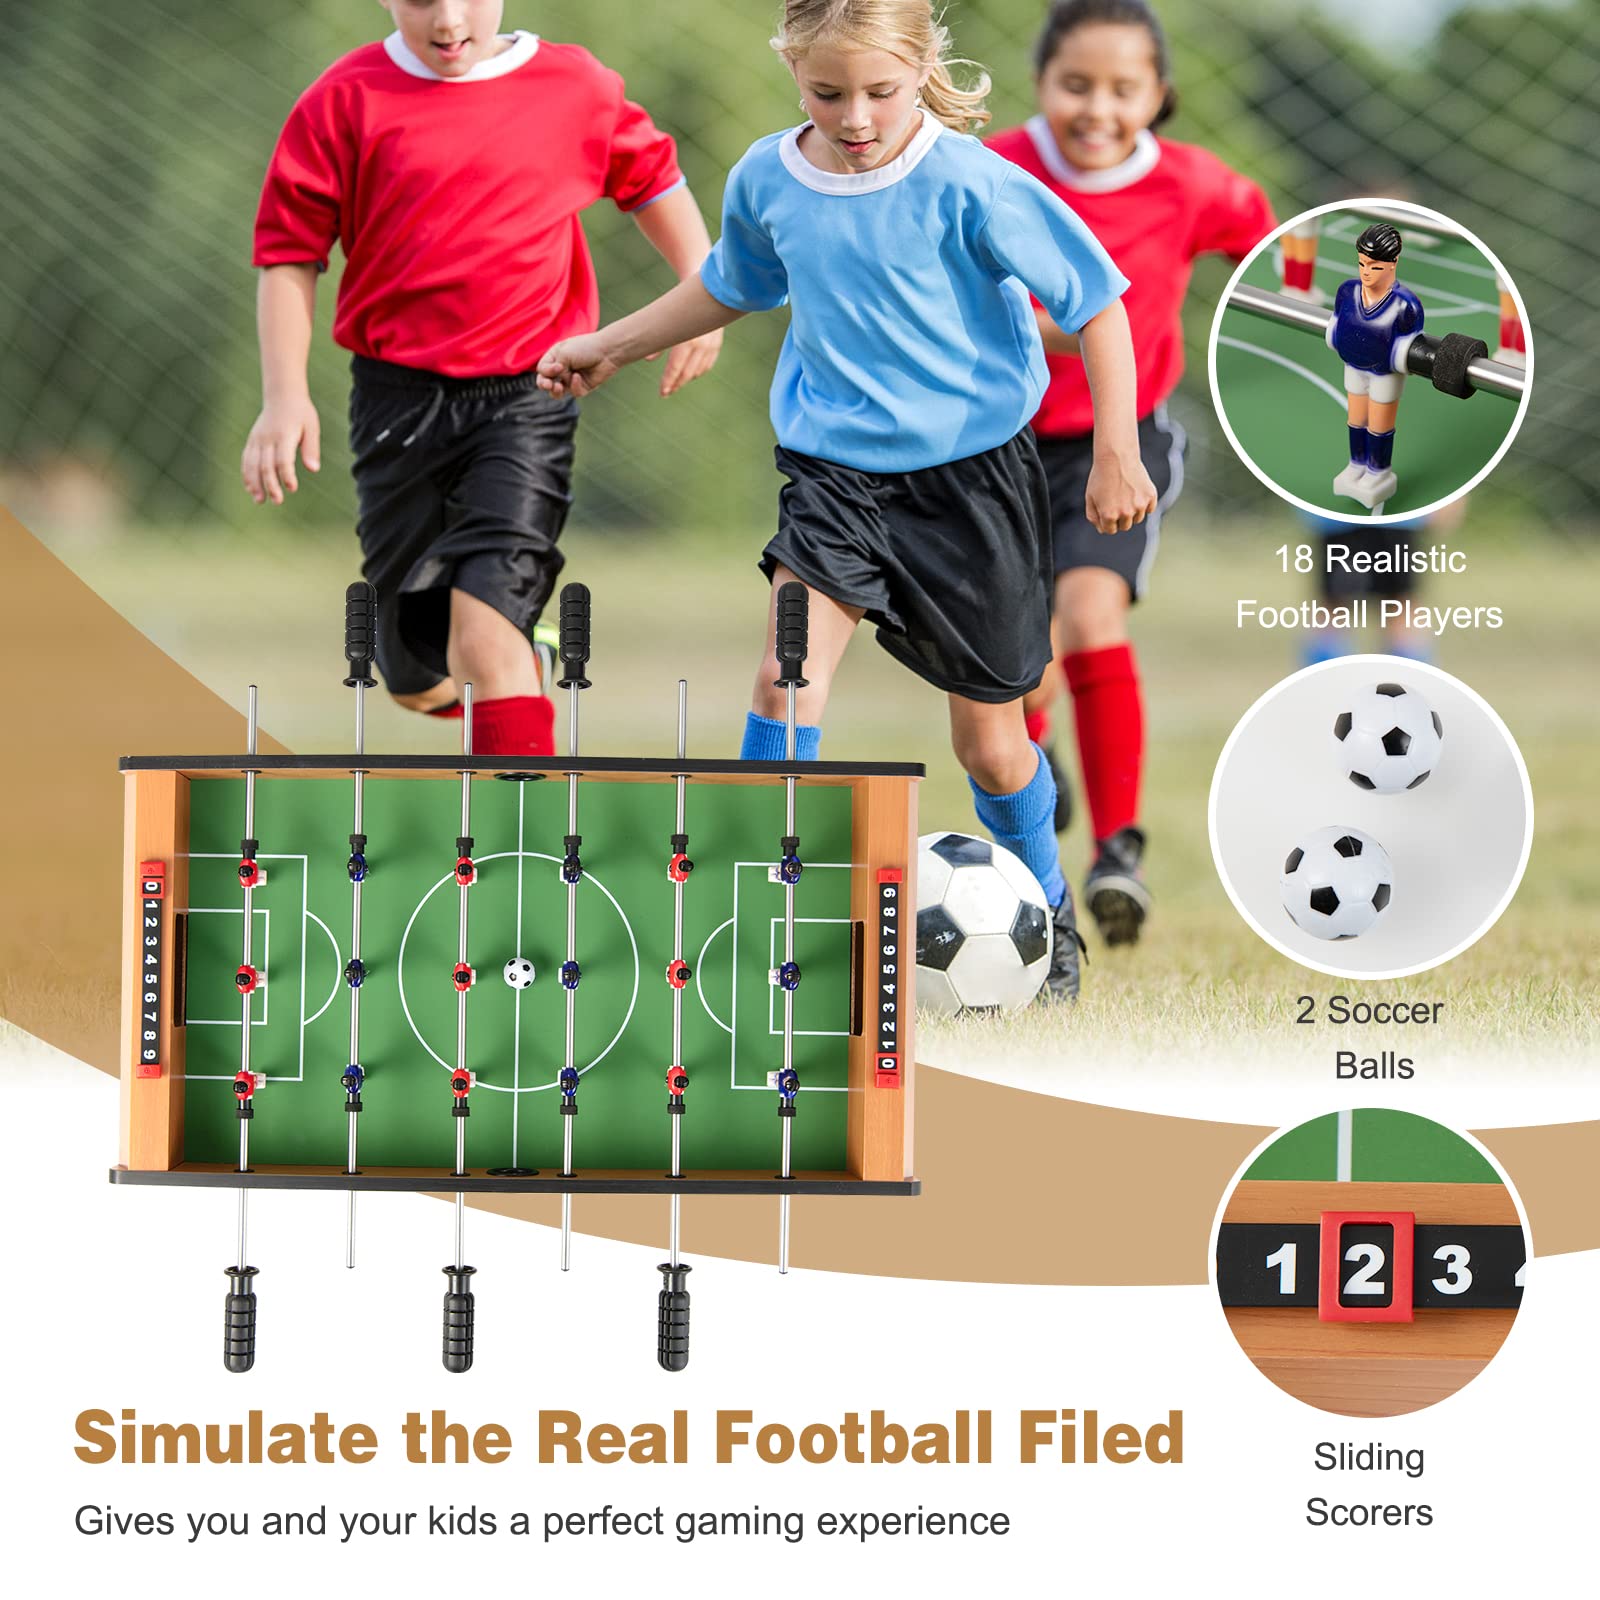 Giantex 27" Foosball Table, Easily Assemble Wooden Soccer Game Table Top w/ Footballs